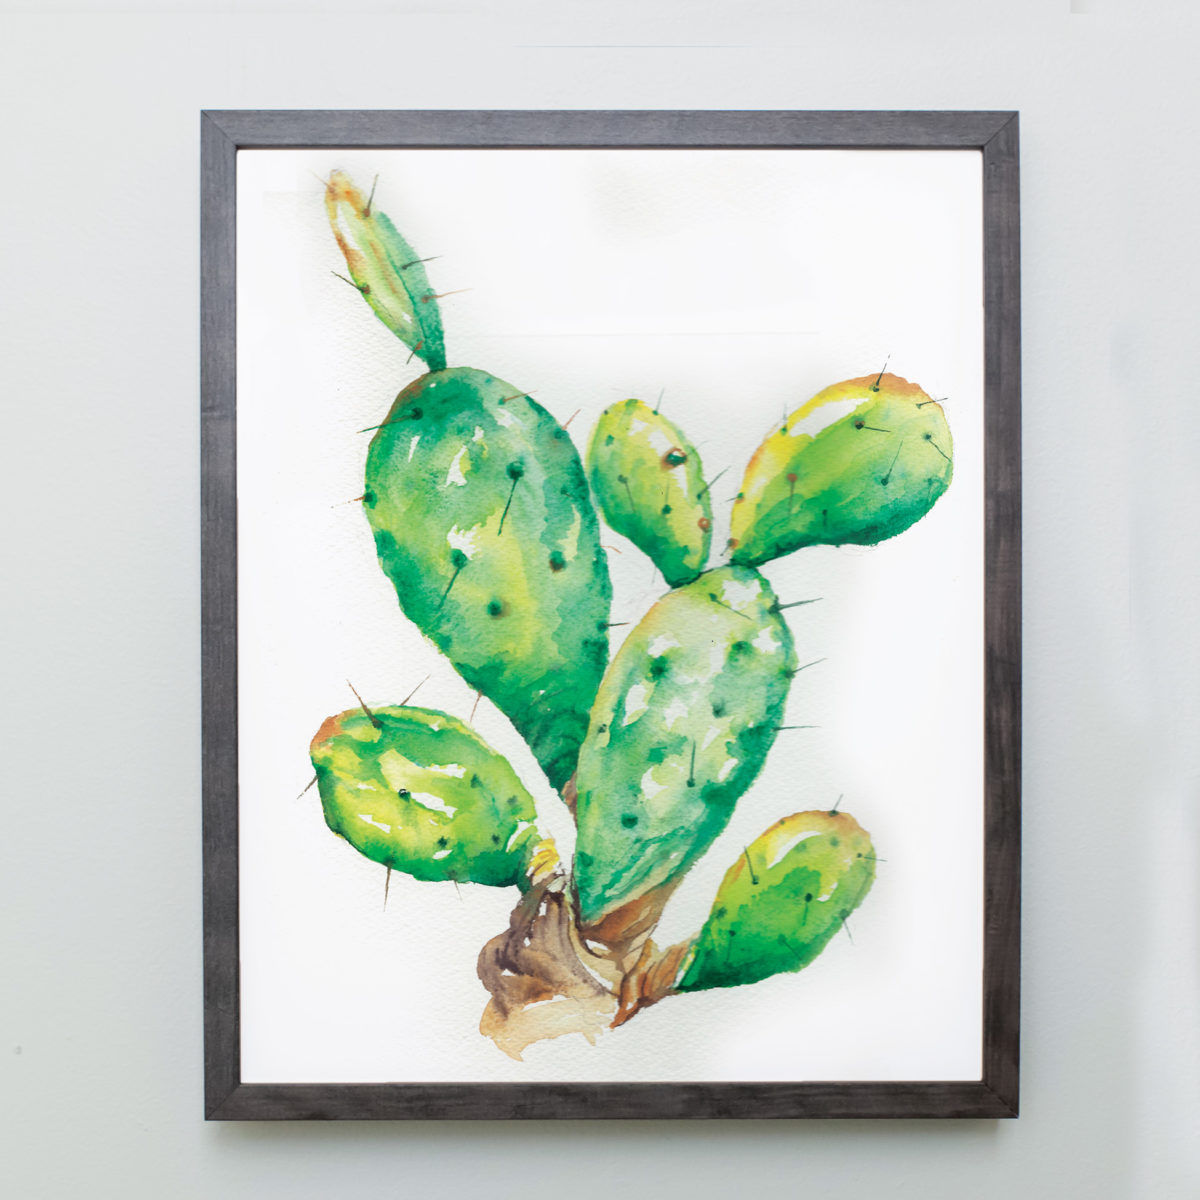 Watercolor of prickly pear cactus in a gray frame